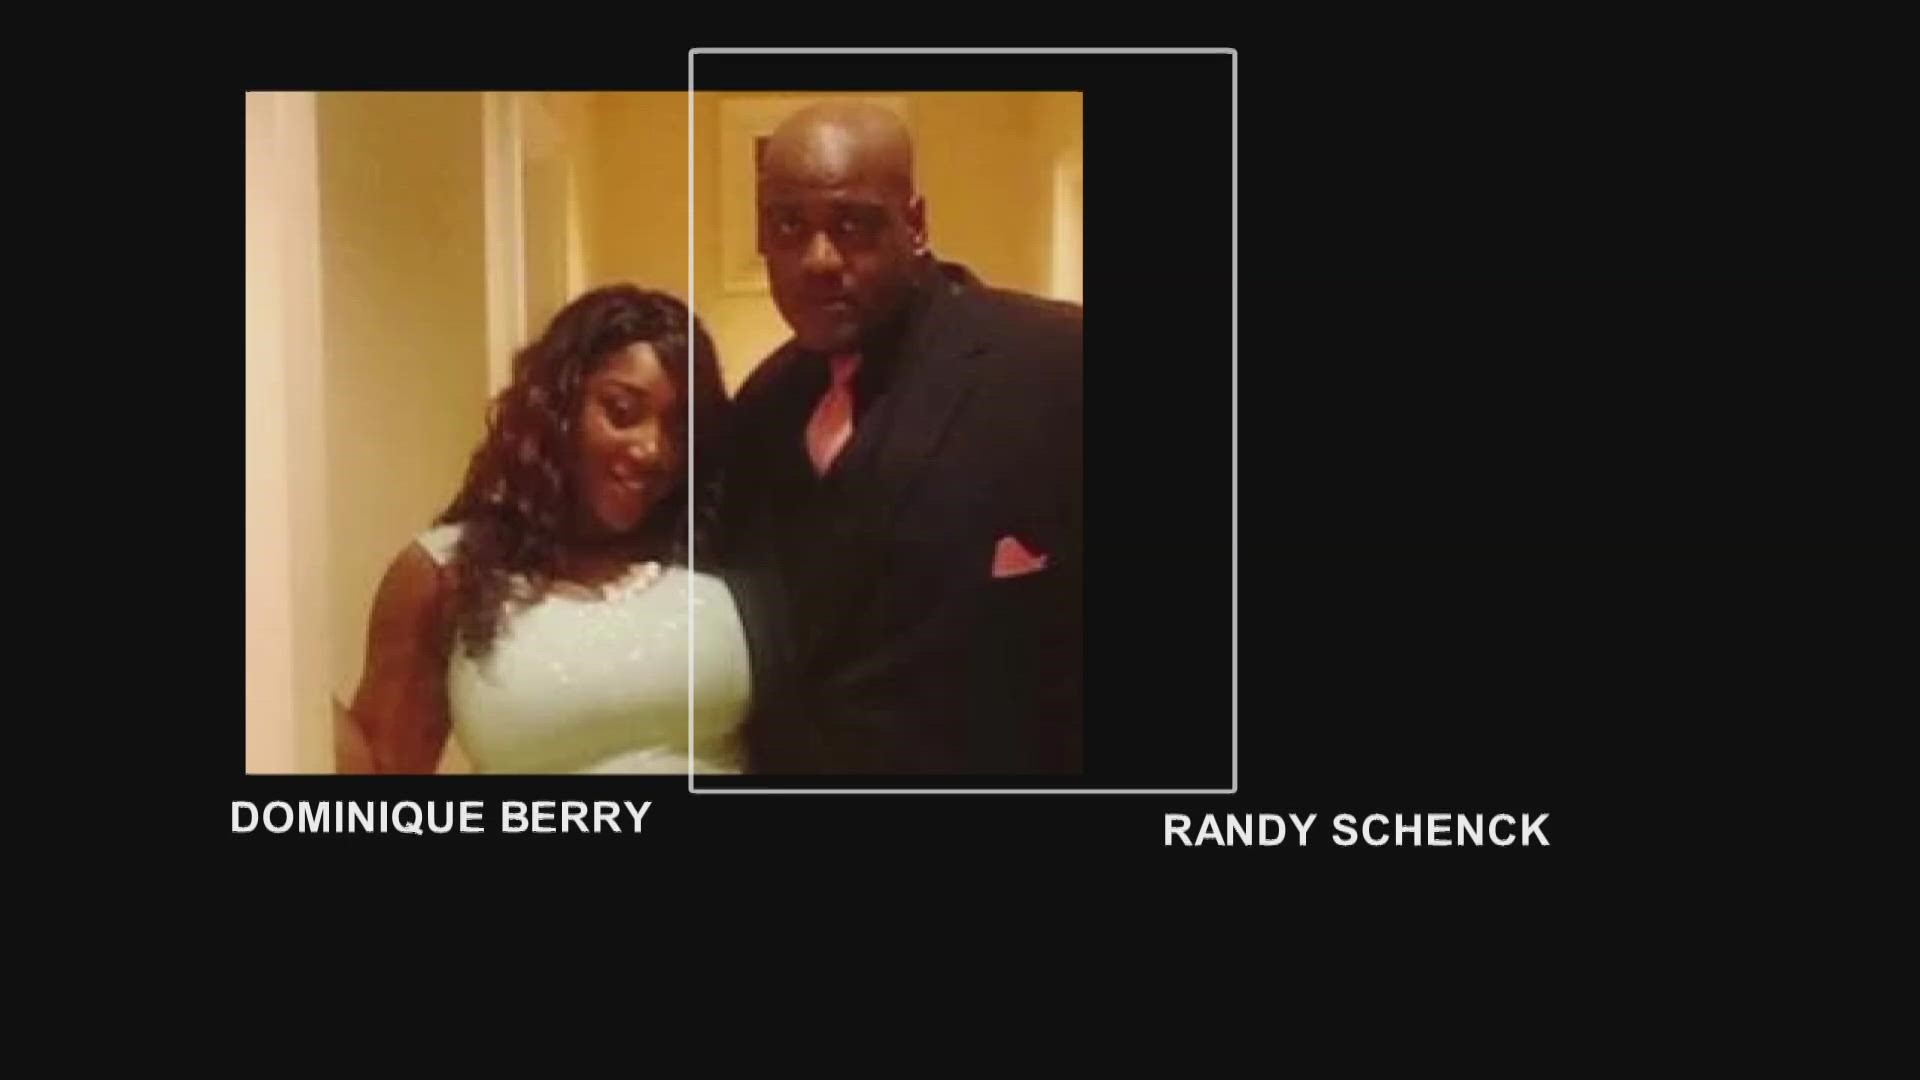 The decision not to file murder or manslaughter charges against the pimp, Randy Schenck, or Dominique Berry, the prostitute angered Arthur's family in Missouri.